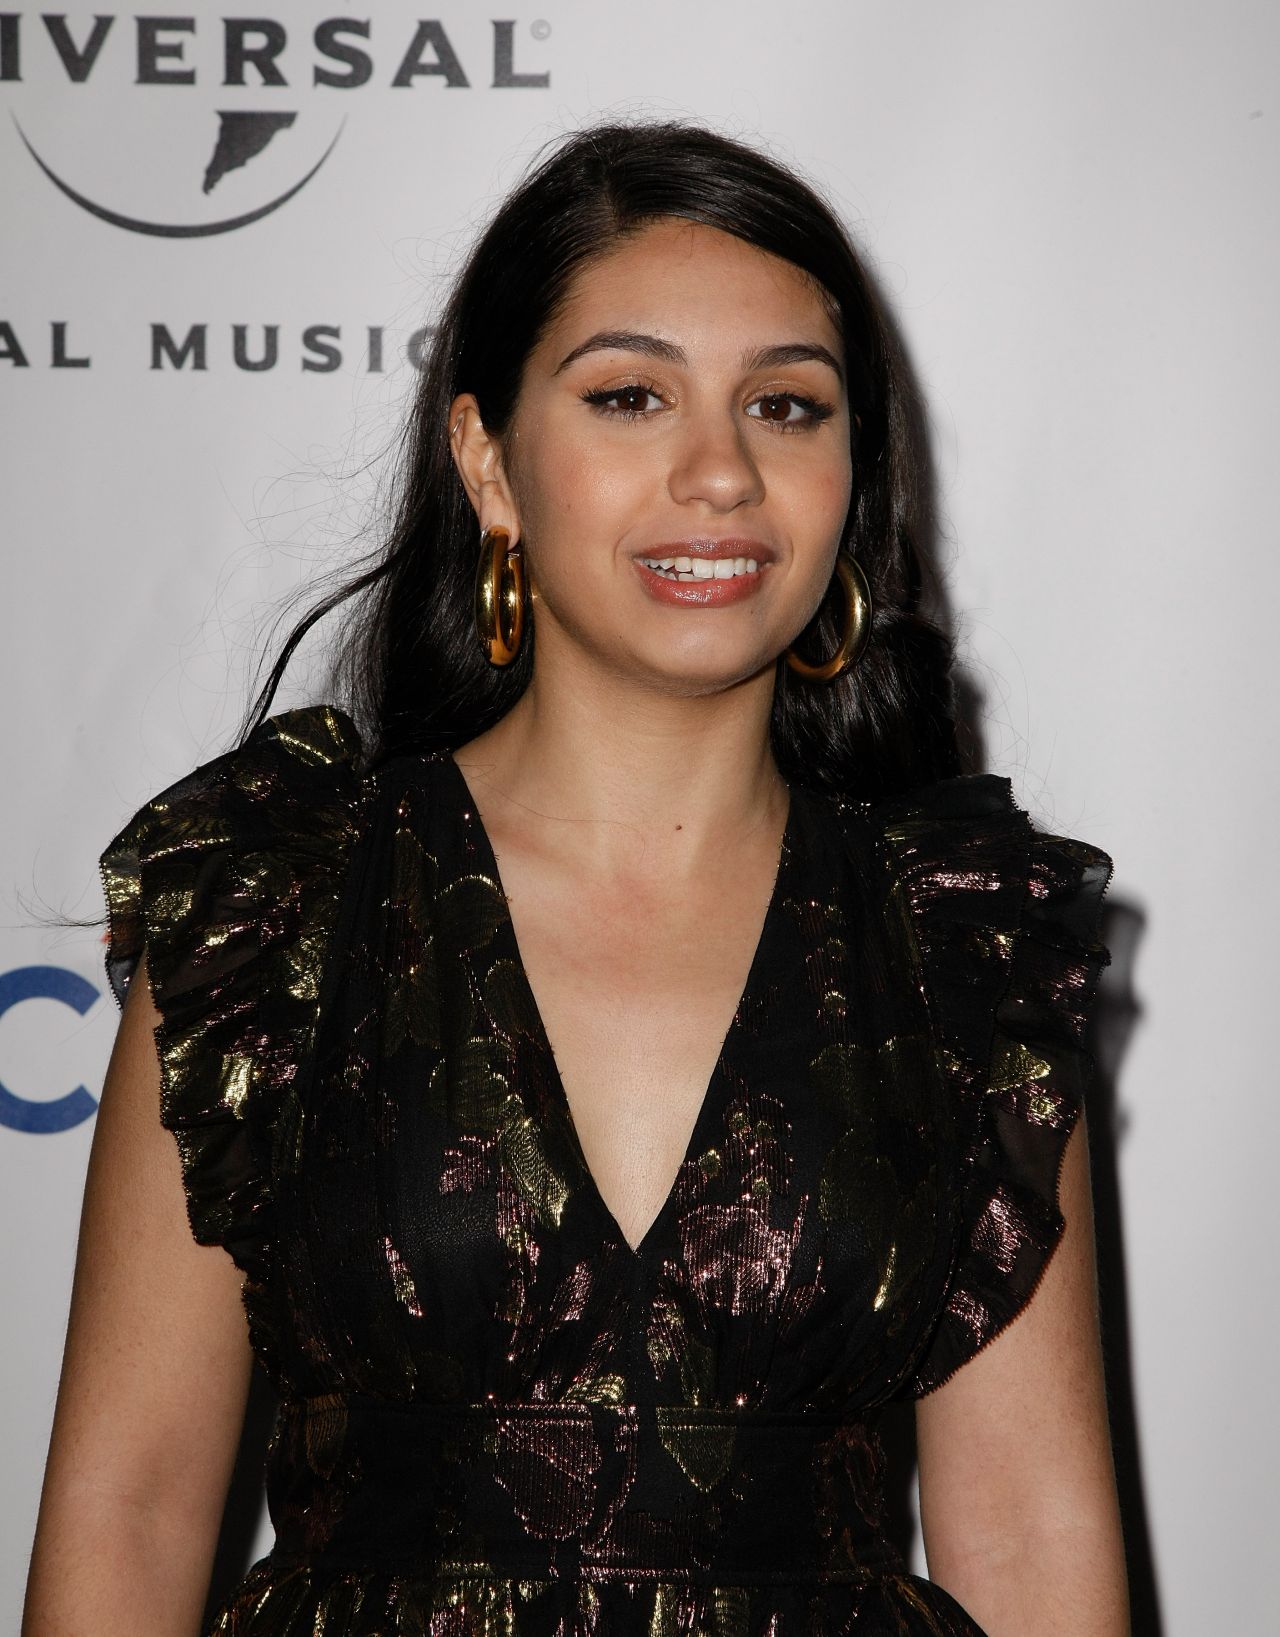 alessia-cara-universal-music-group-grammy-after-party-02-10-2019-4.jpg